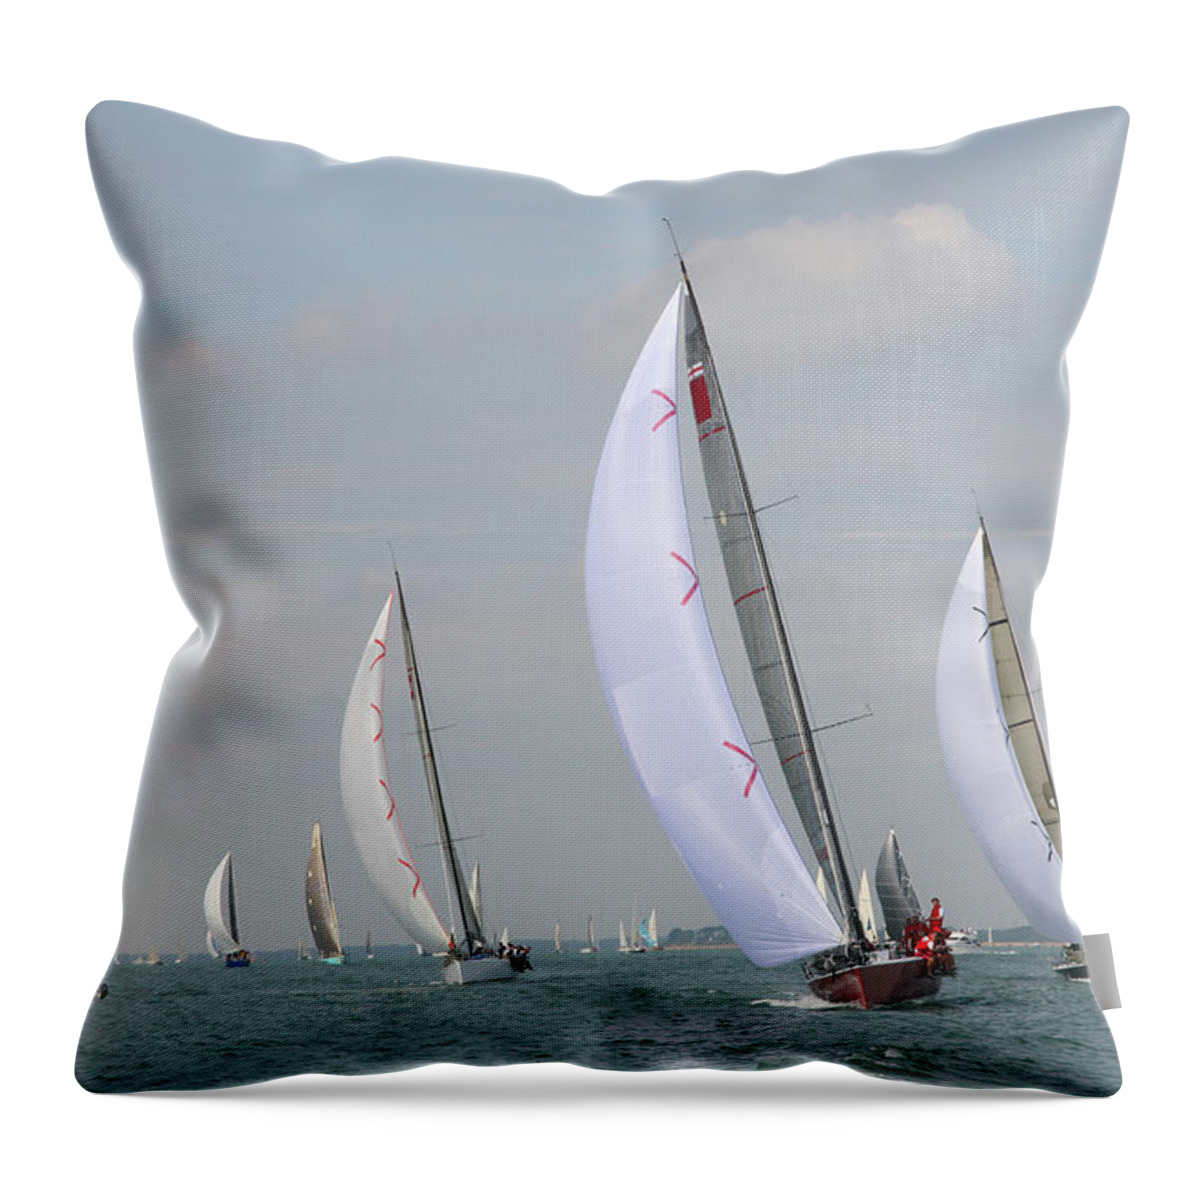 Teamwork Throw Pillow featuring the photograph The Red Team by Nicholas Free